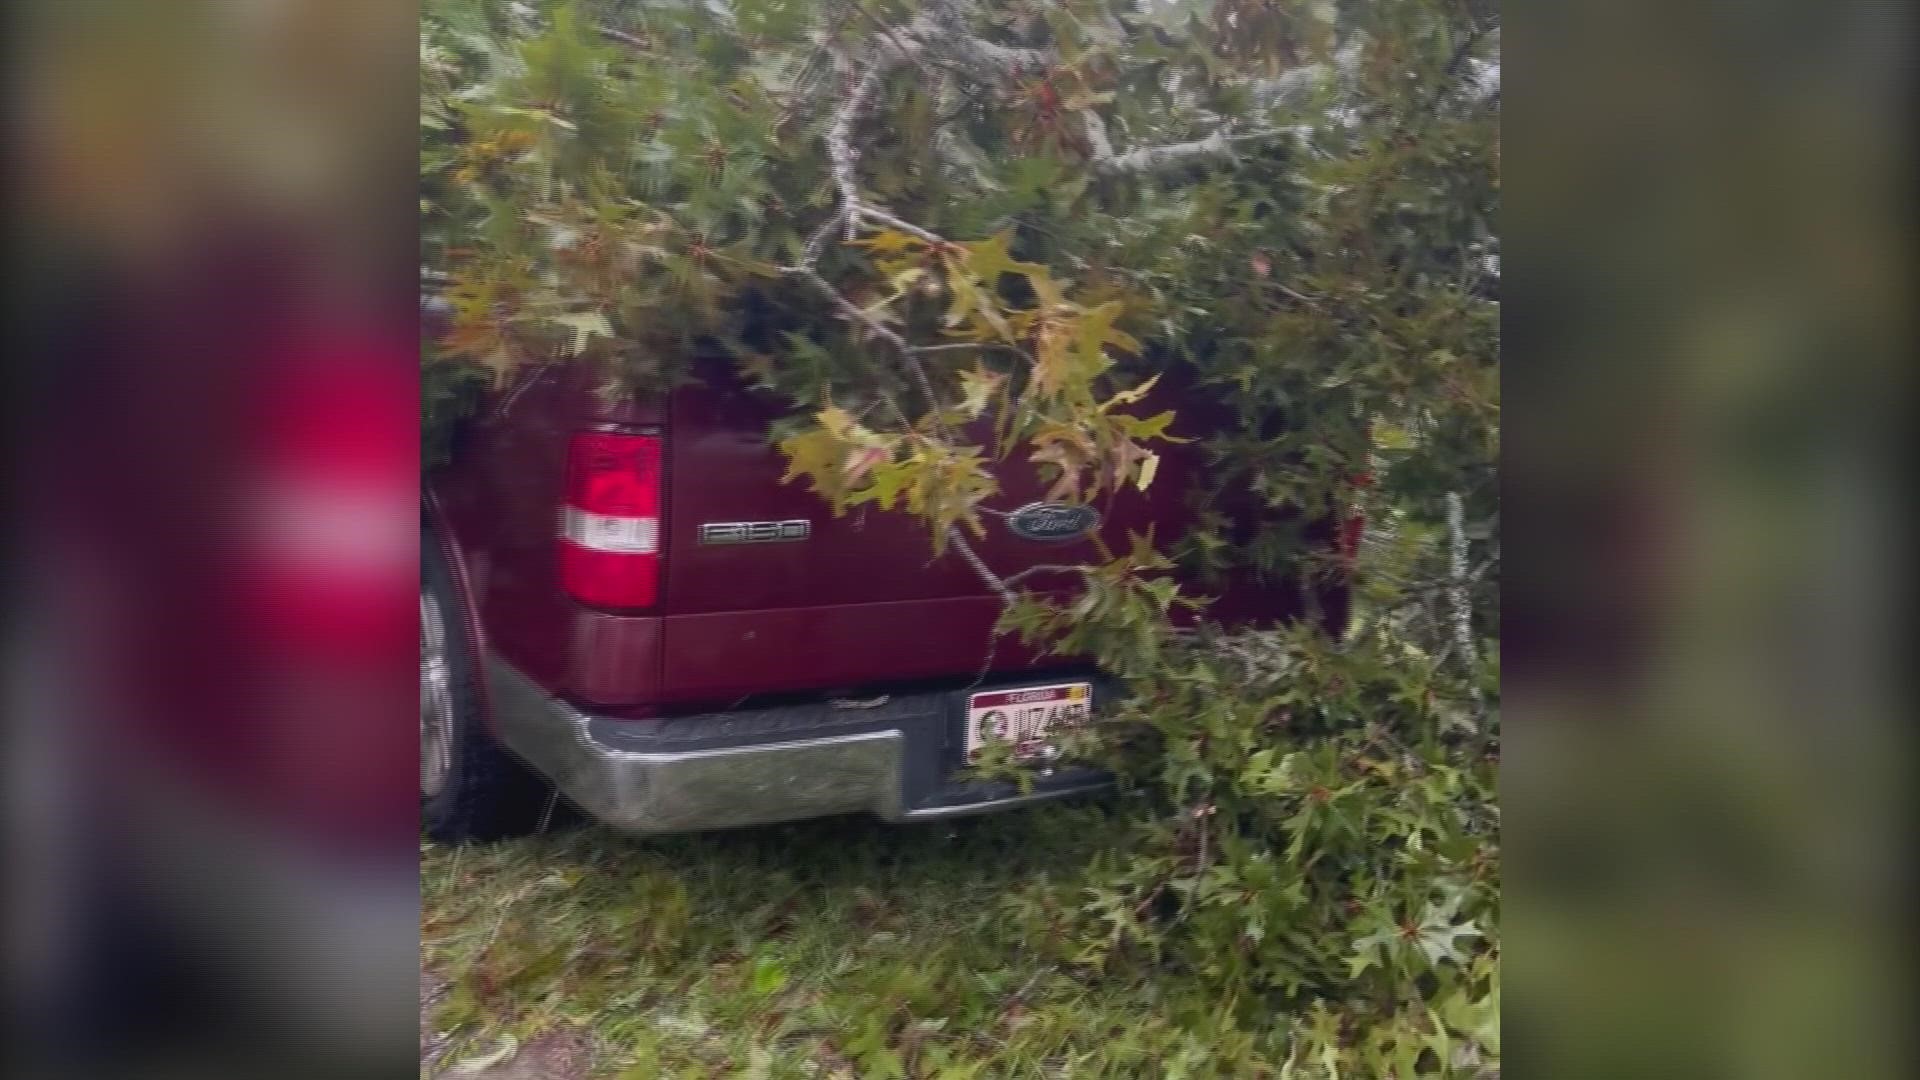 According to Shawn's wife April Terrell, Shawn got out of the cab moments before a tree fell on his truck.